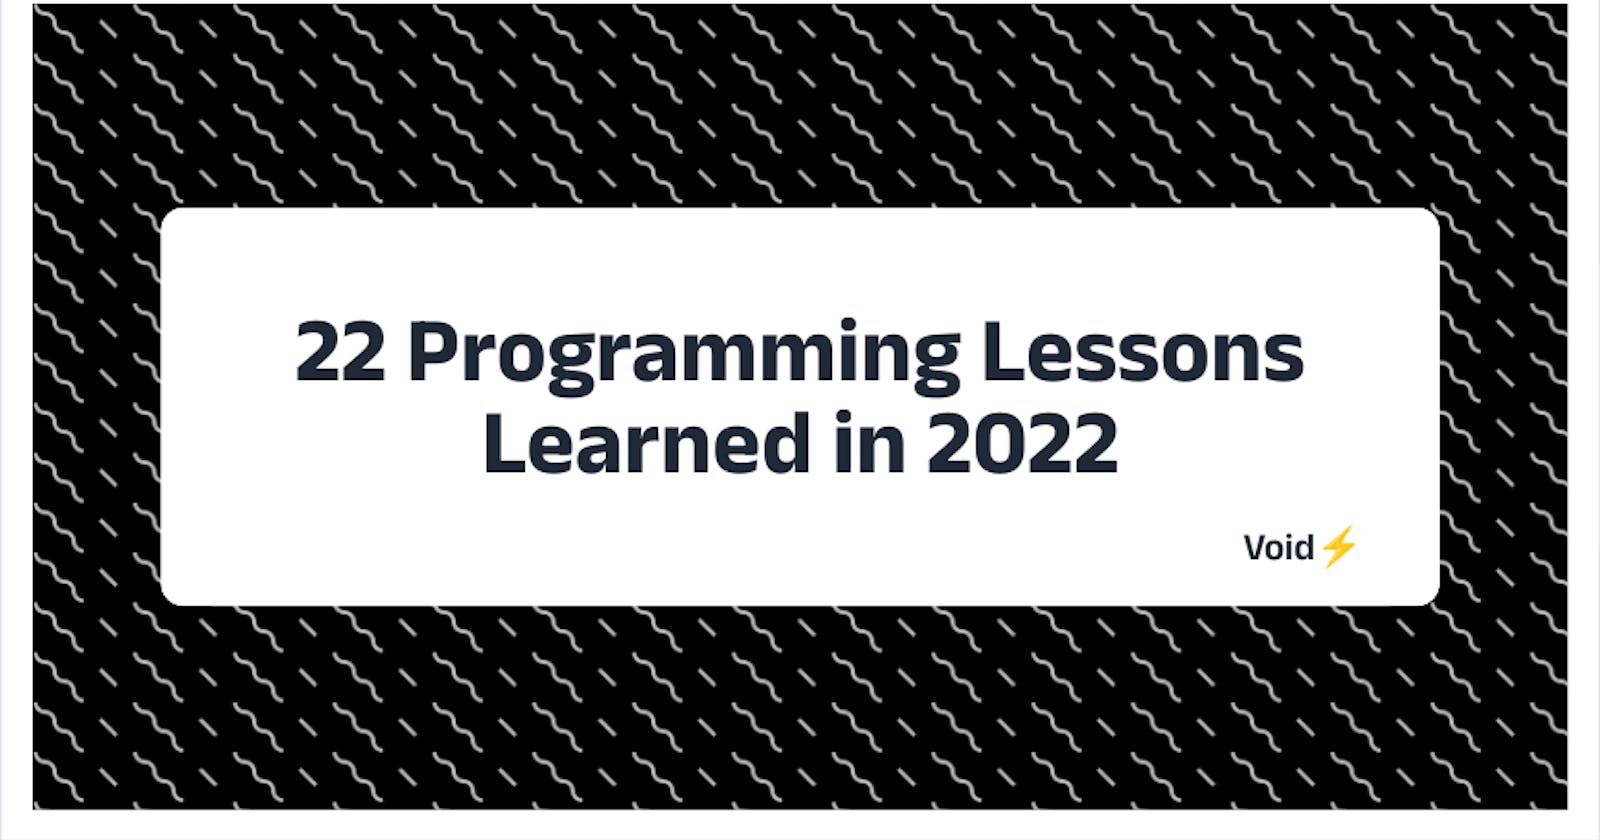 22 Programming Lessons Learned in 2022